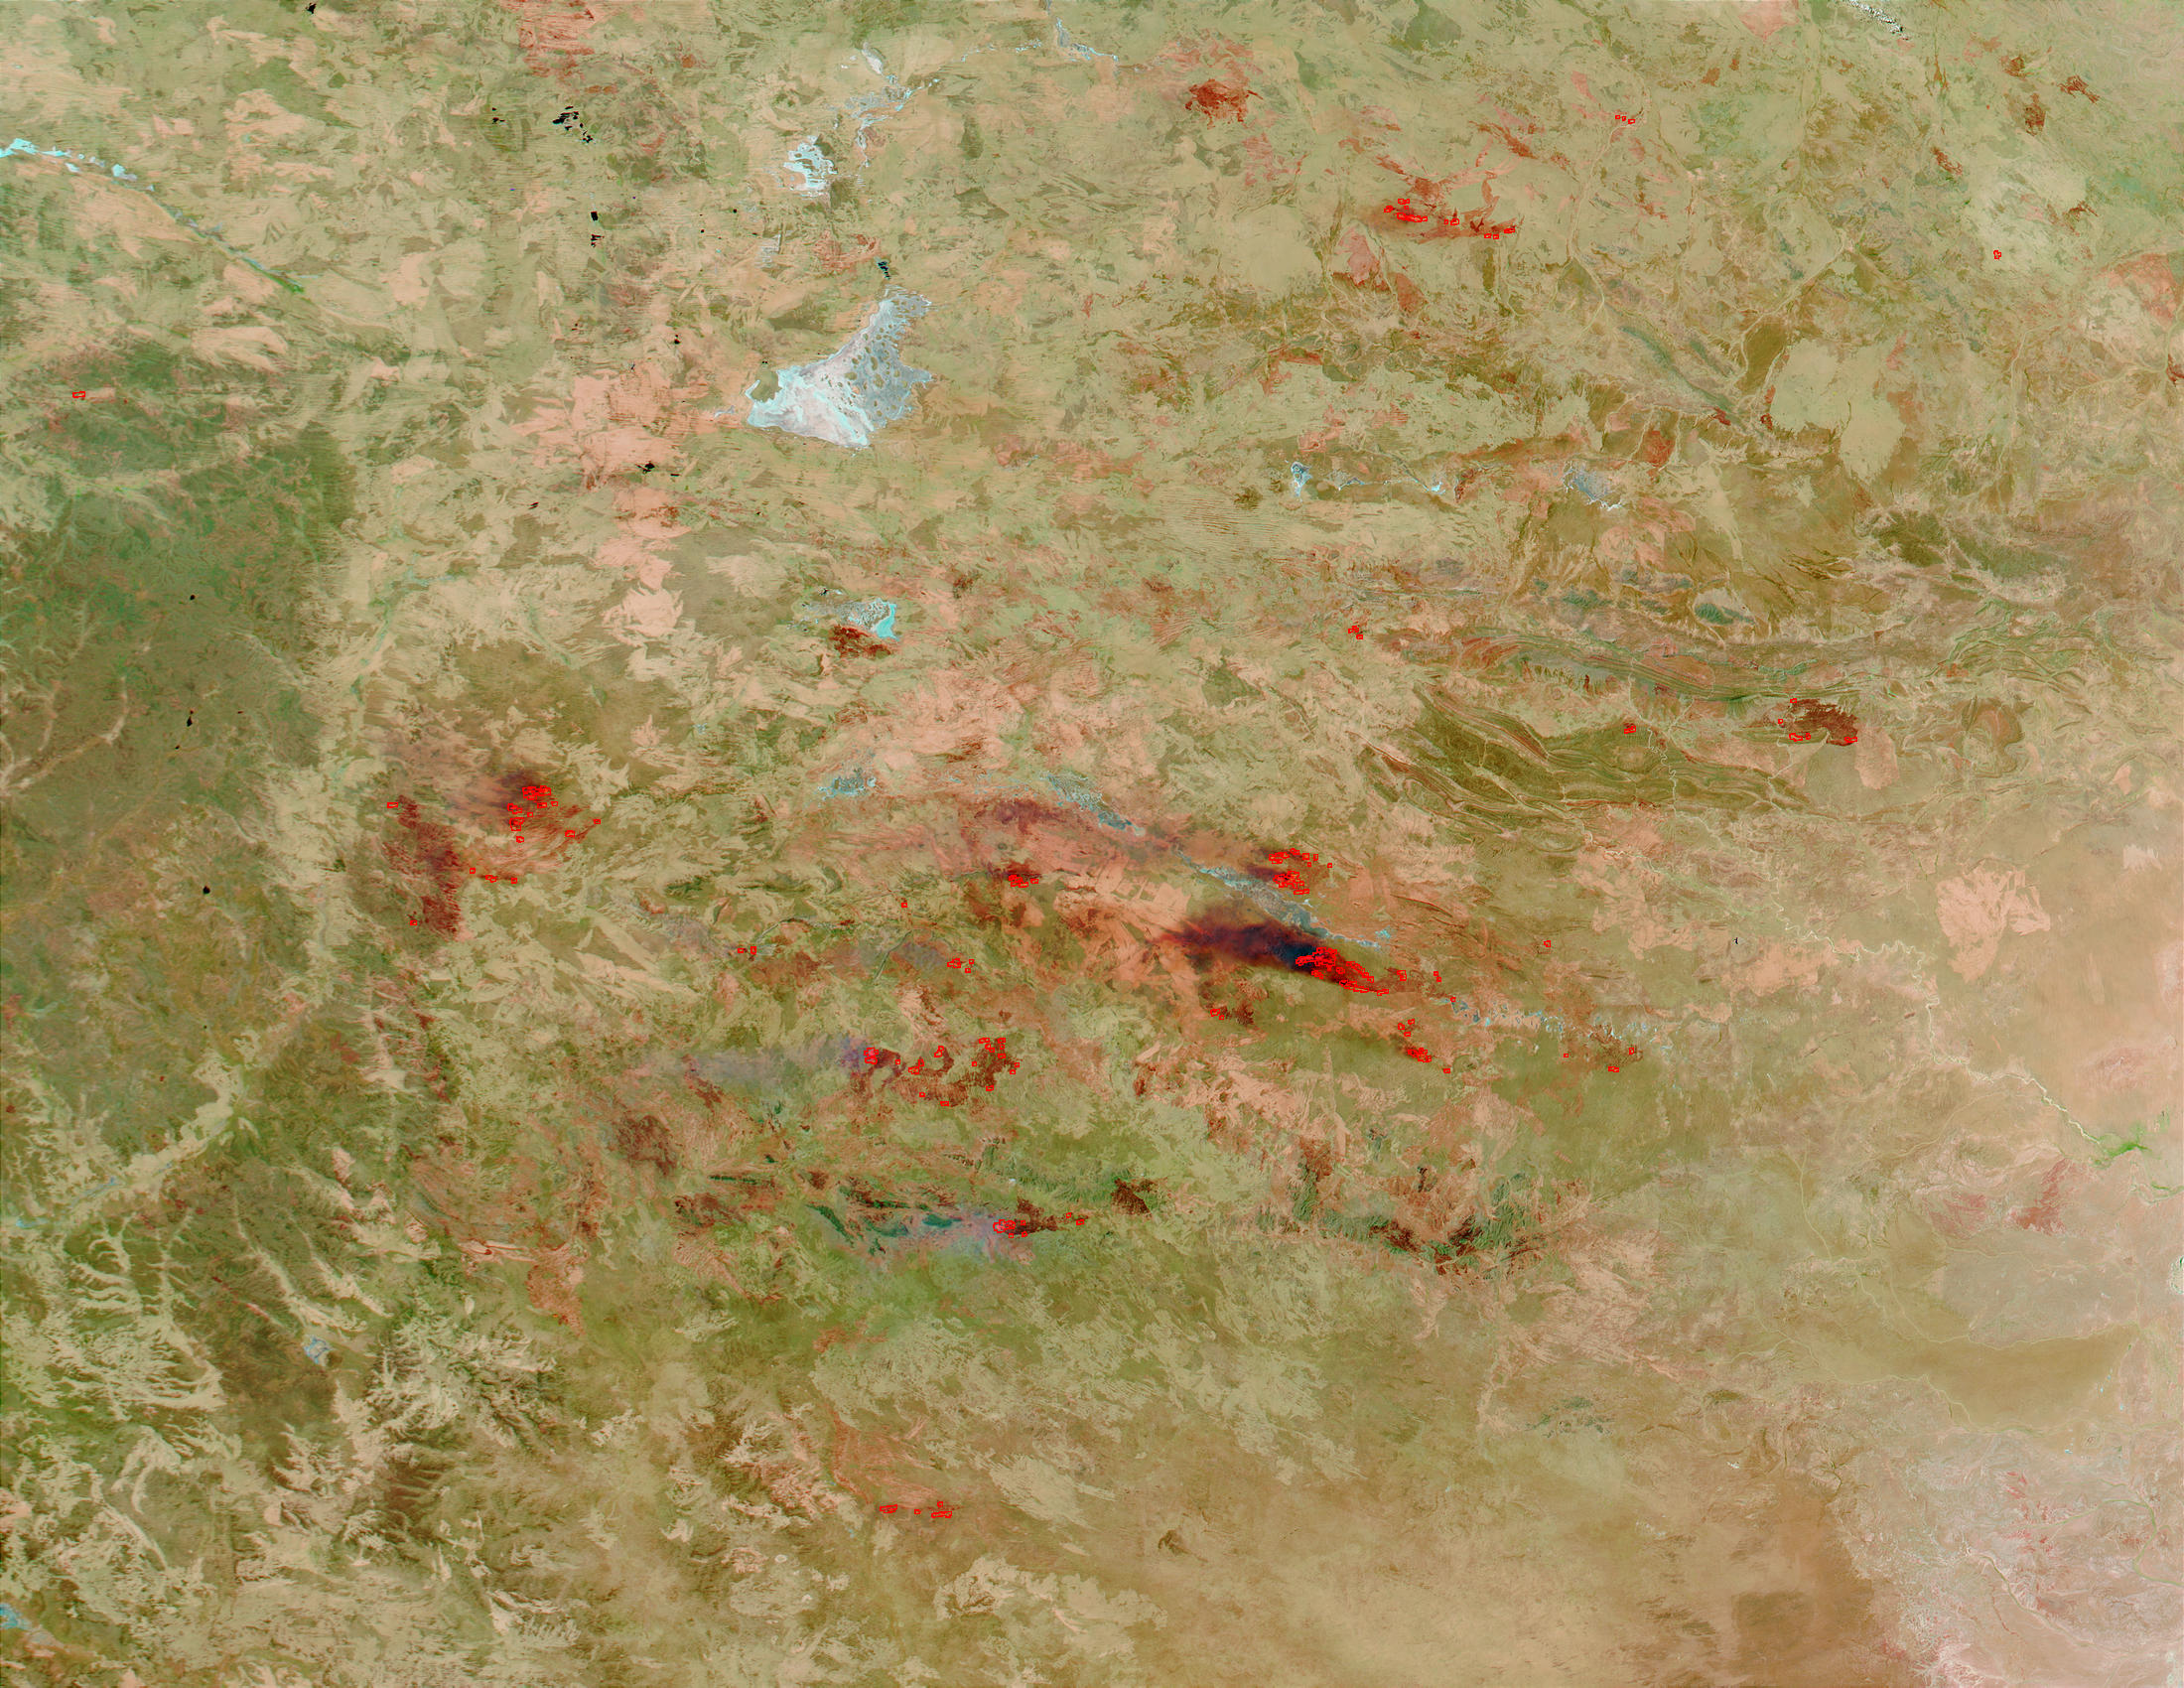 Fires and burn scars near Alice Springs, Central Australia - related image preview